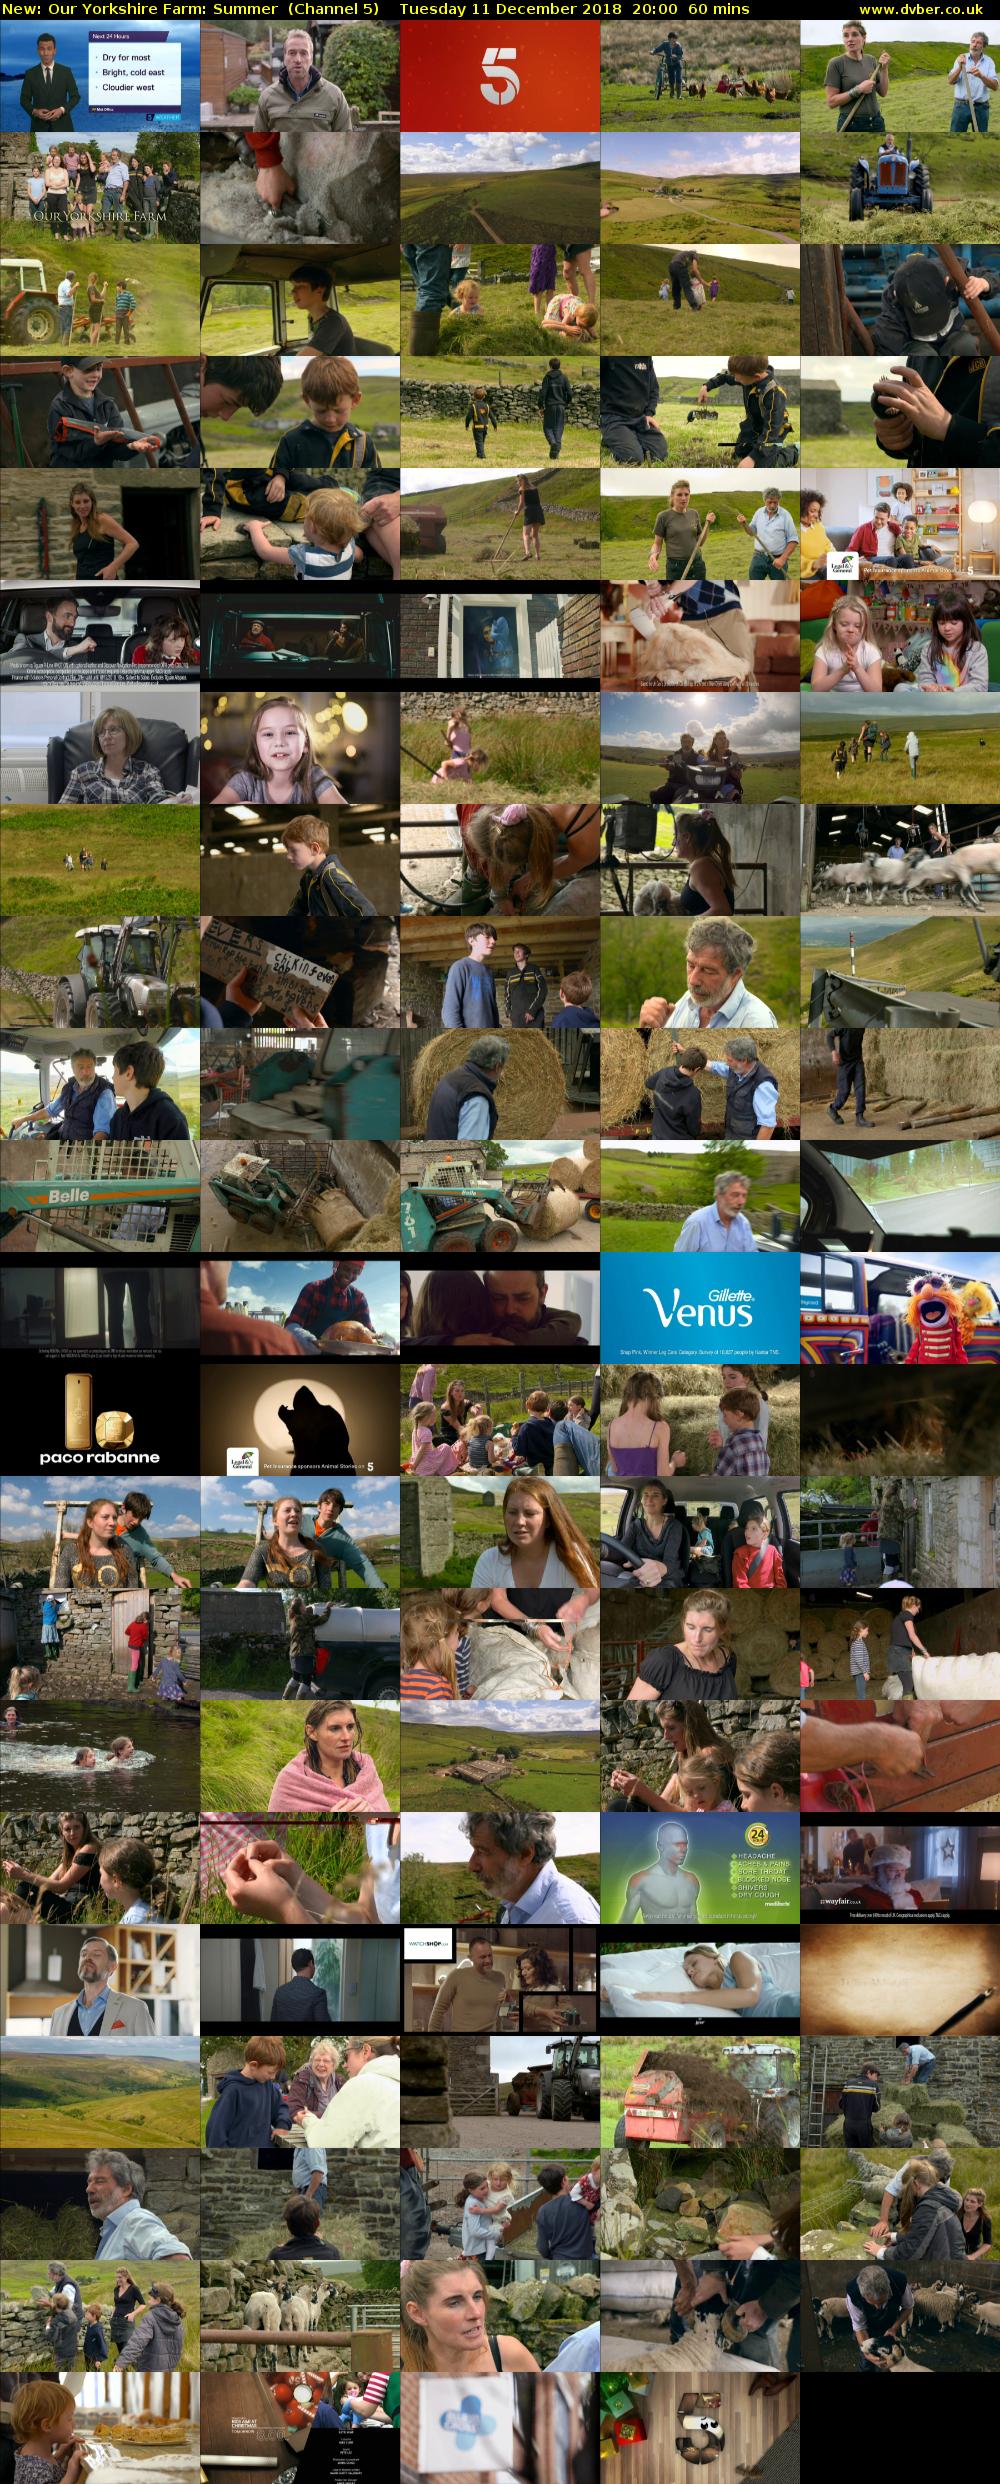 Our Yorkshire Farm: Summer (Channel 5) Tuesday 11 December 2018 20:00 - 21:00